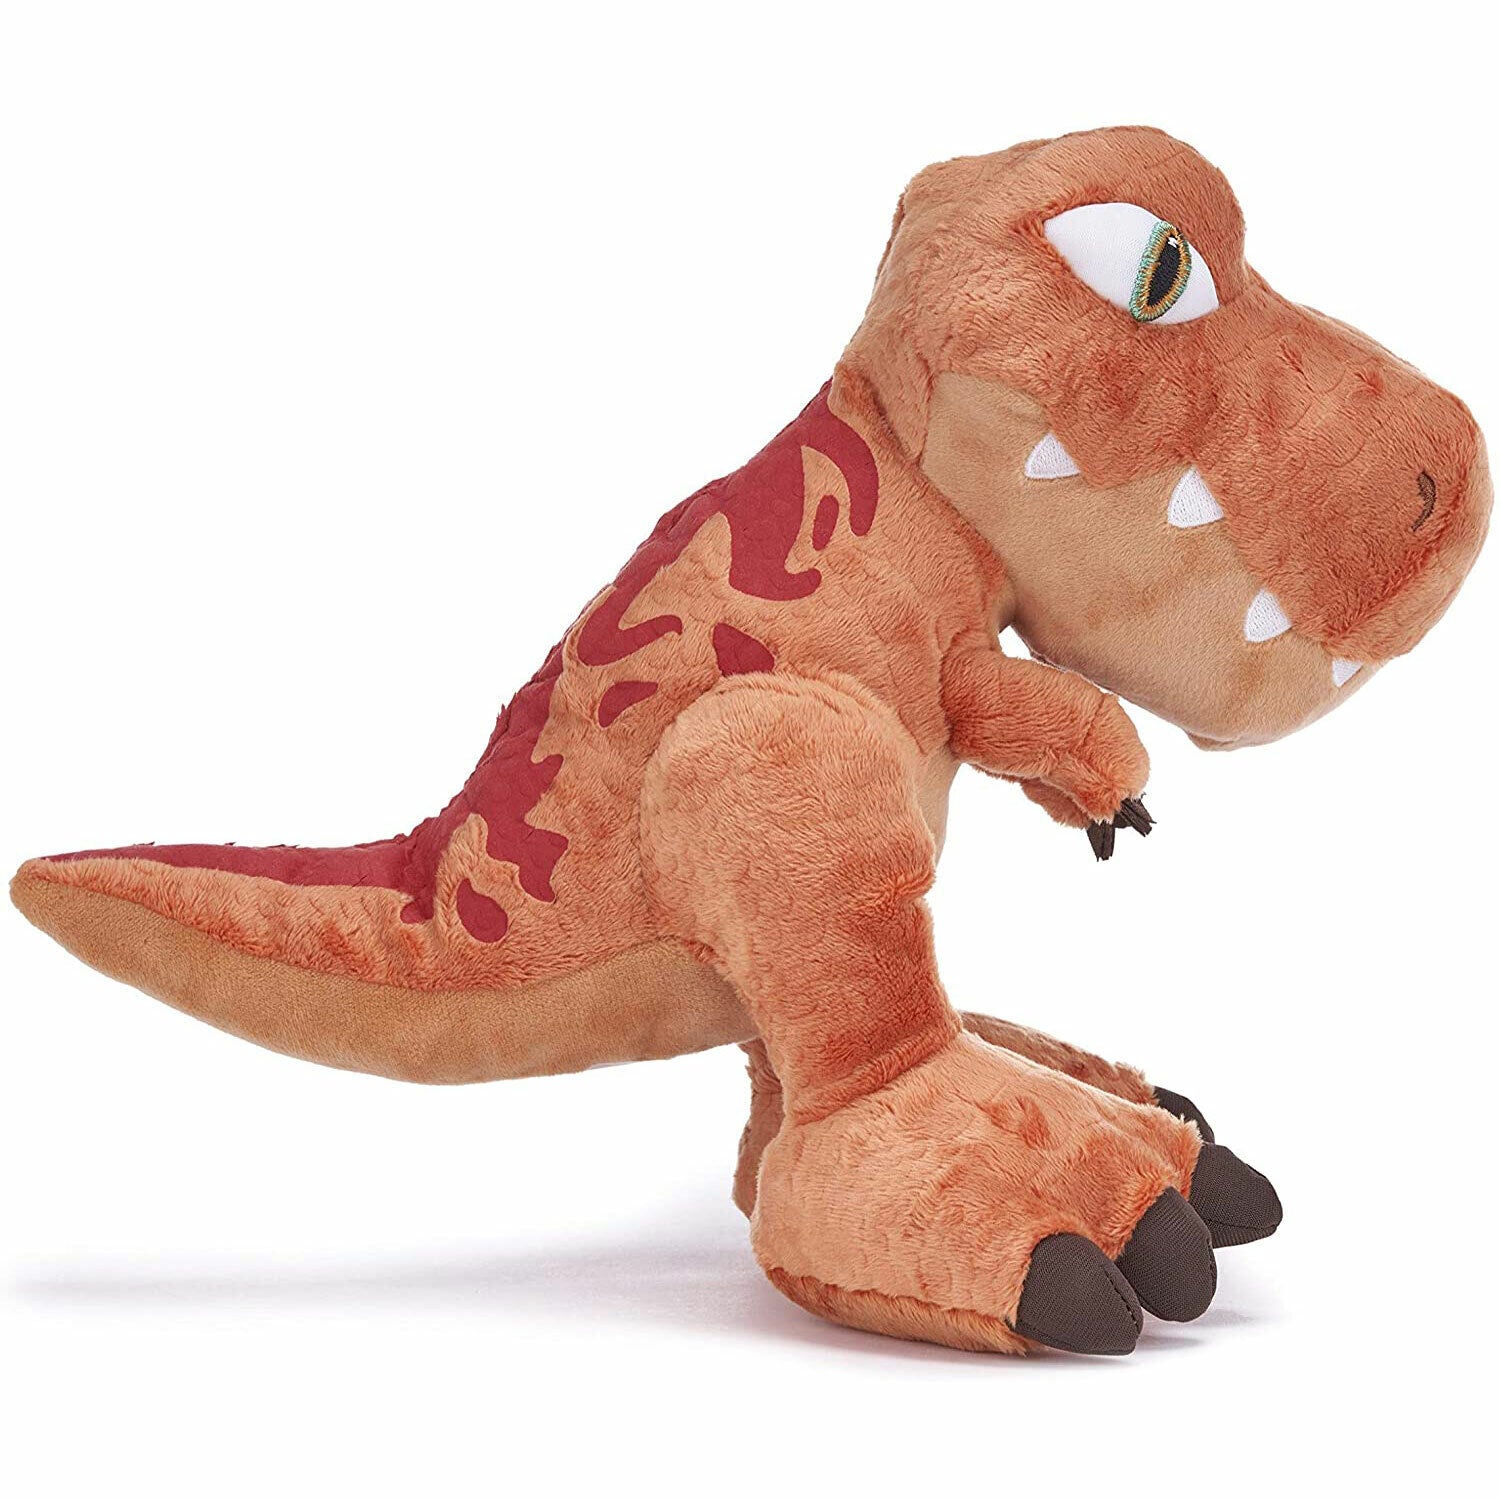 New Jurassic World 10" Chunky T-Rex Plush - Perfect Gift for Dino Fans!